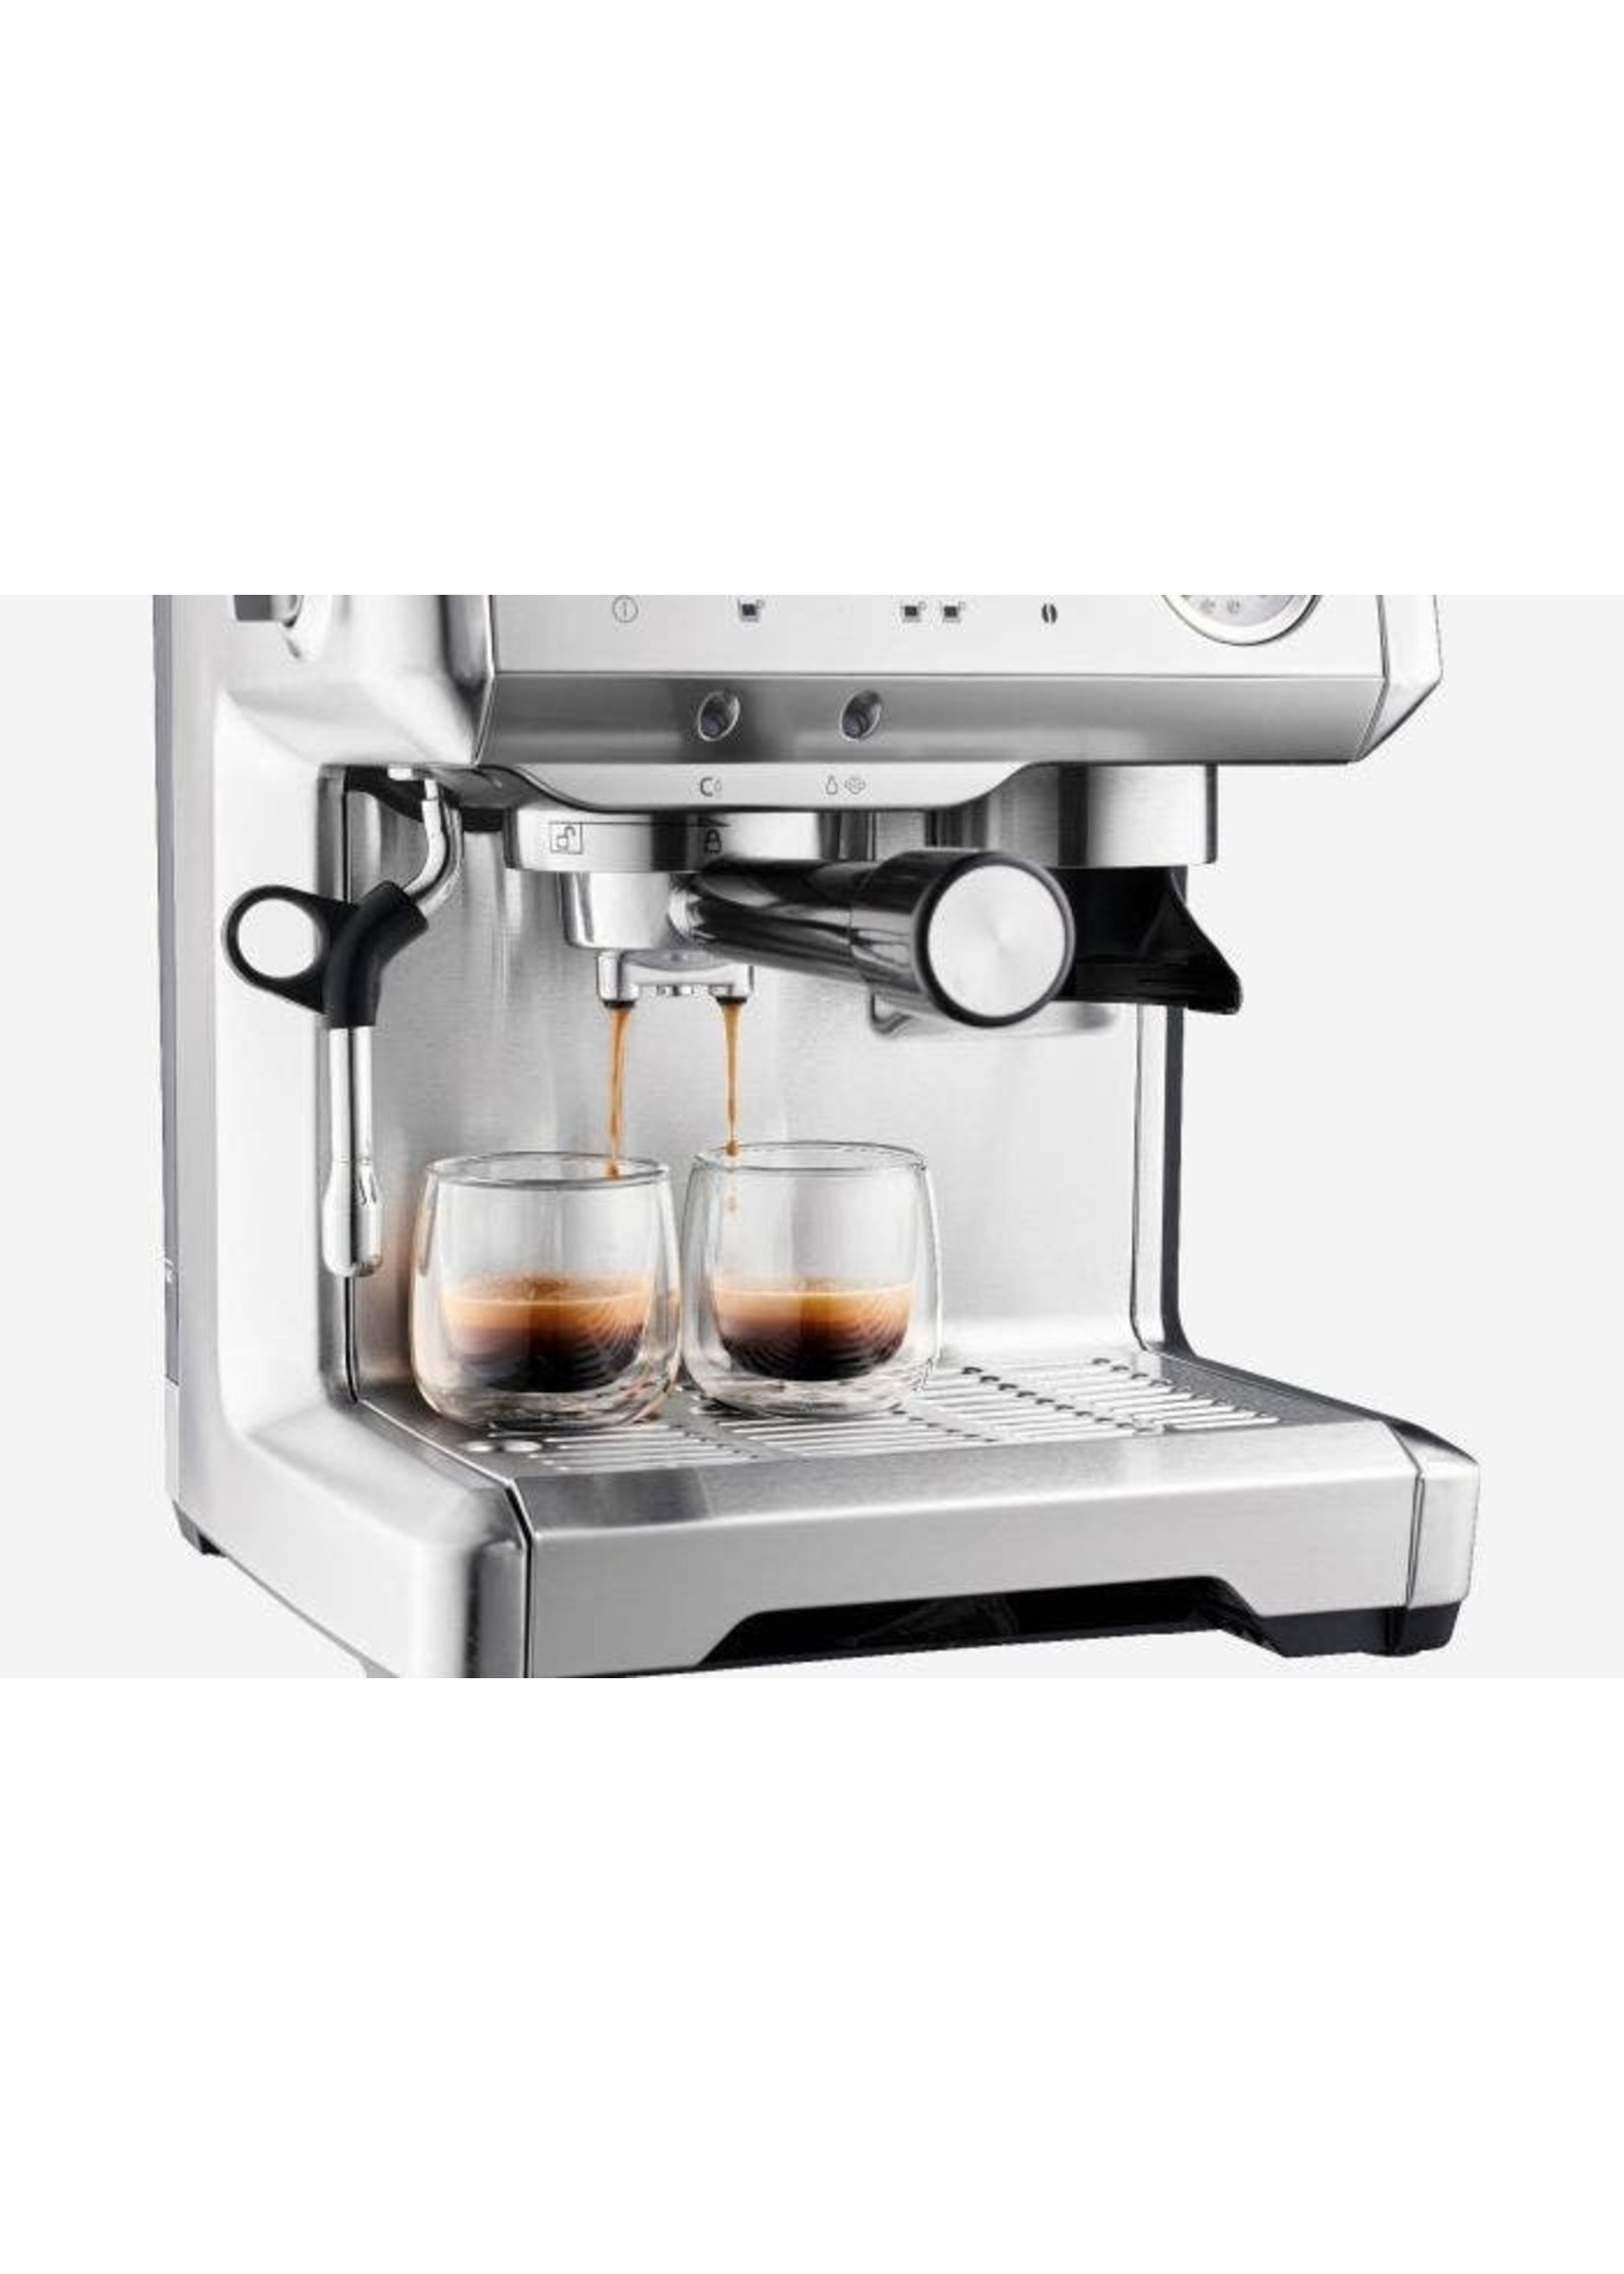 Solis Solis Grind & Infuse Compact RVS (Type 1018)